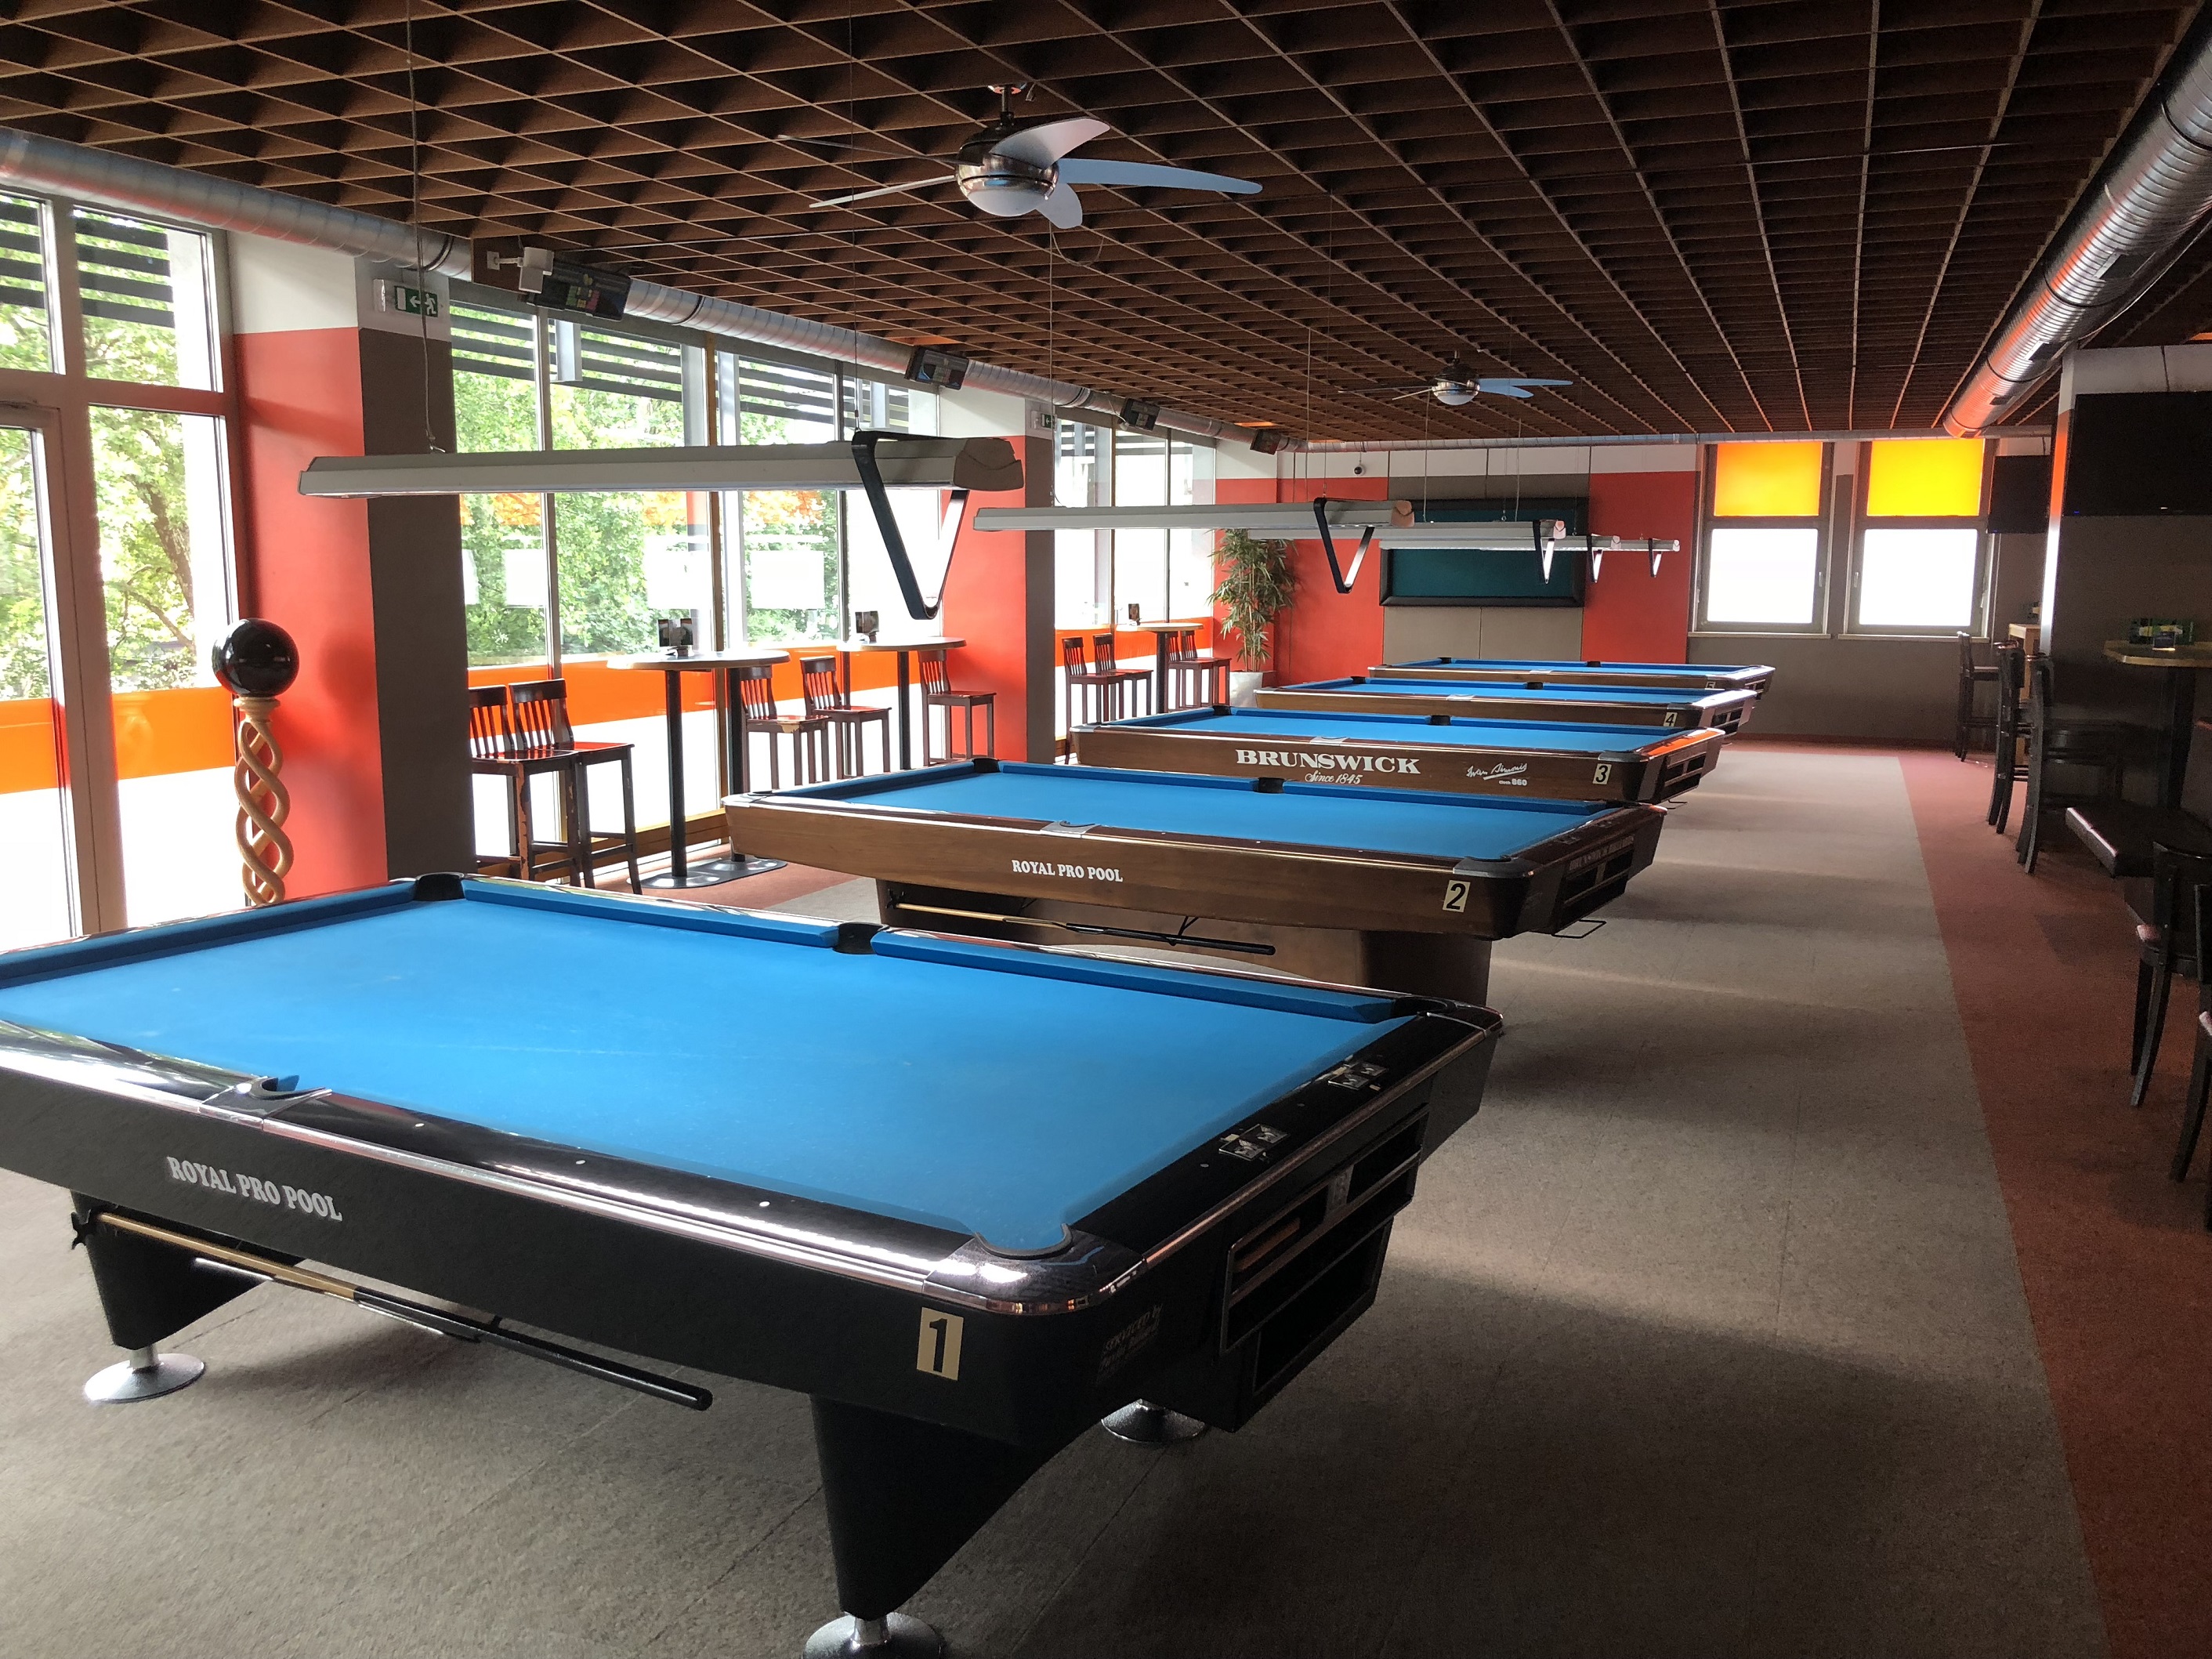 Pool Shooters in Austria, Europe | Bars,Billiards - Rated 3.2